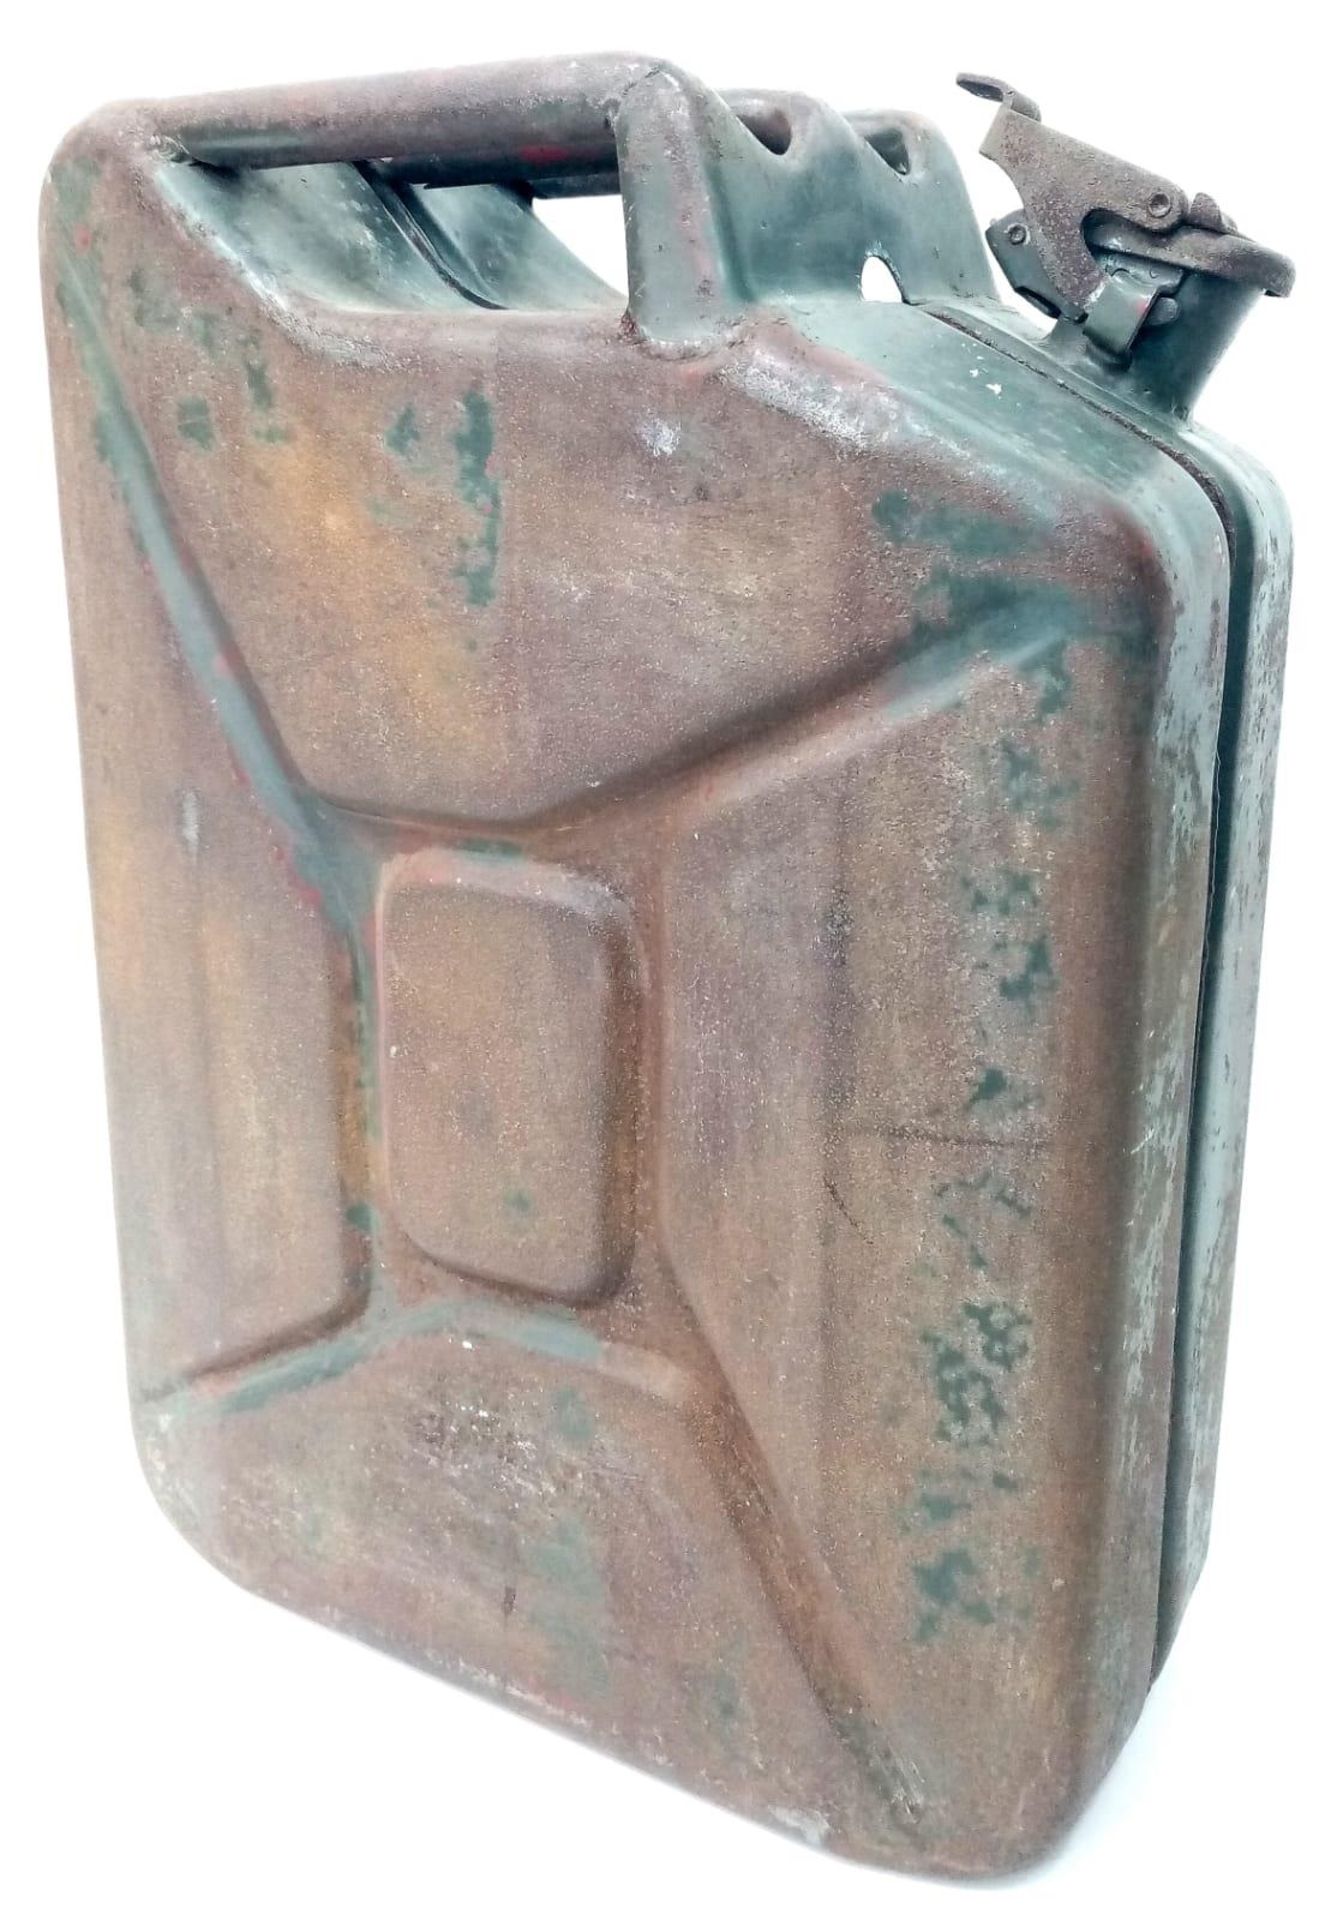 100% Genuine Waffen SS 20 Ltr. Jerry Can Made by Sandrik. This can was found in Normandy France. - Image 6 of 6